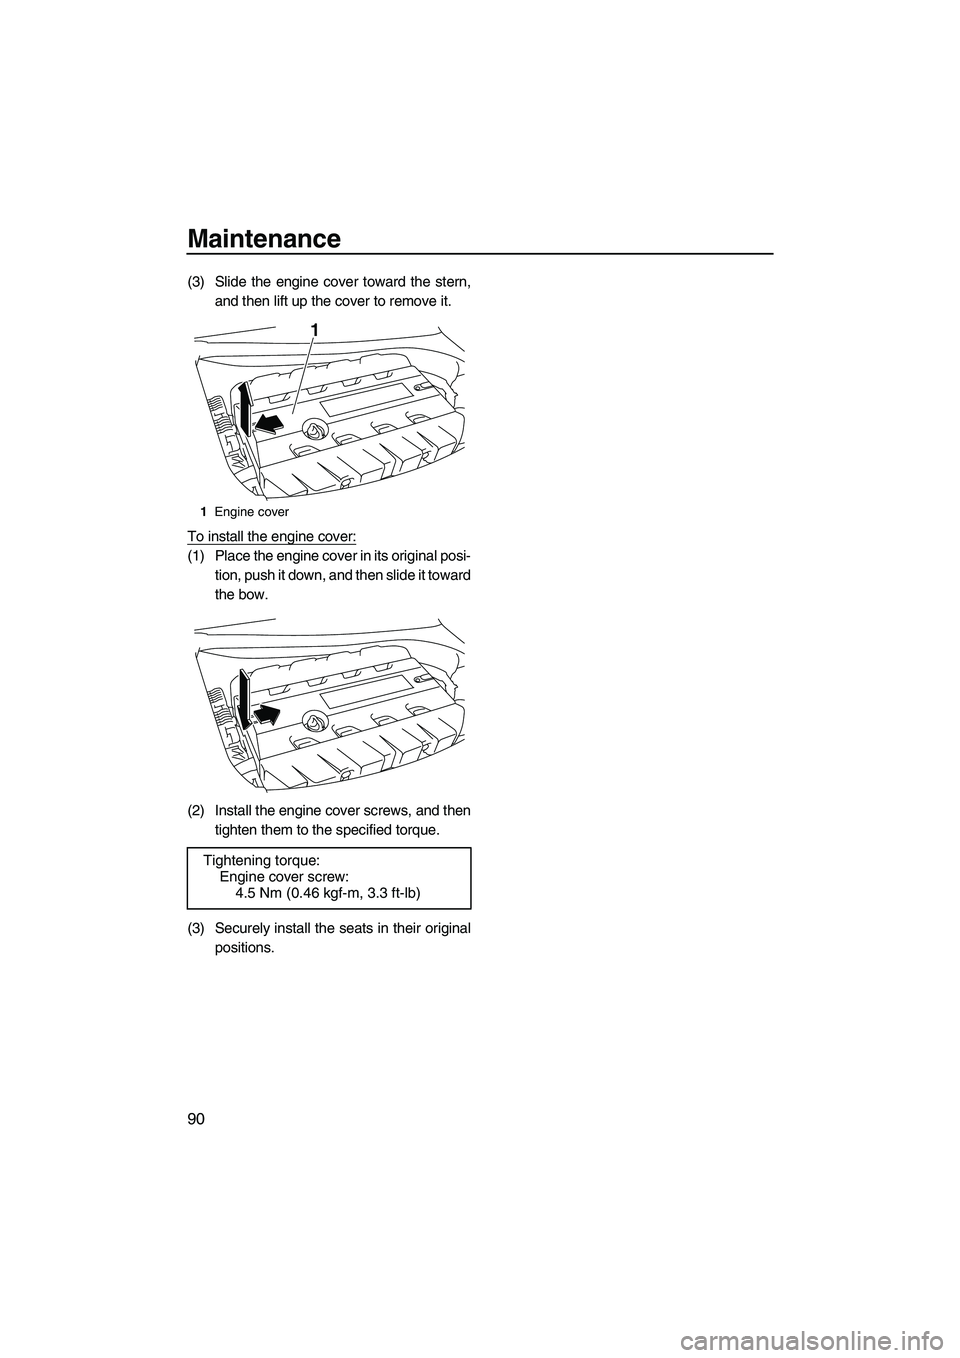 YAMAHA SVHO 2011  Owners Manual Maintenance
90
(3) Slide the engine cover toward the stern,
and then lift up the cover to remove it.
To install the engine cover:
(1) Place the engine cover in its original posi-
tion, push it down, a